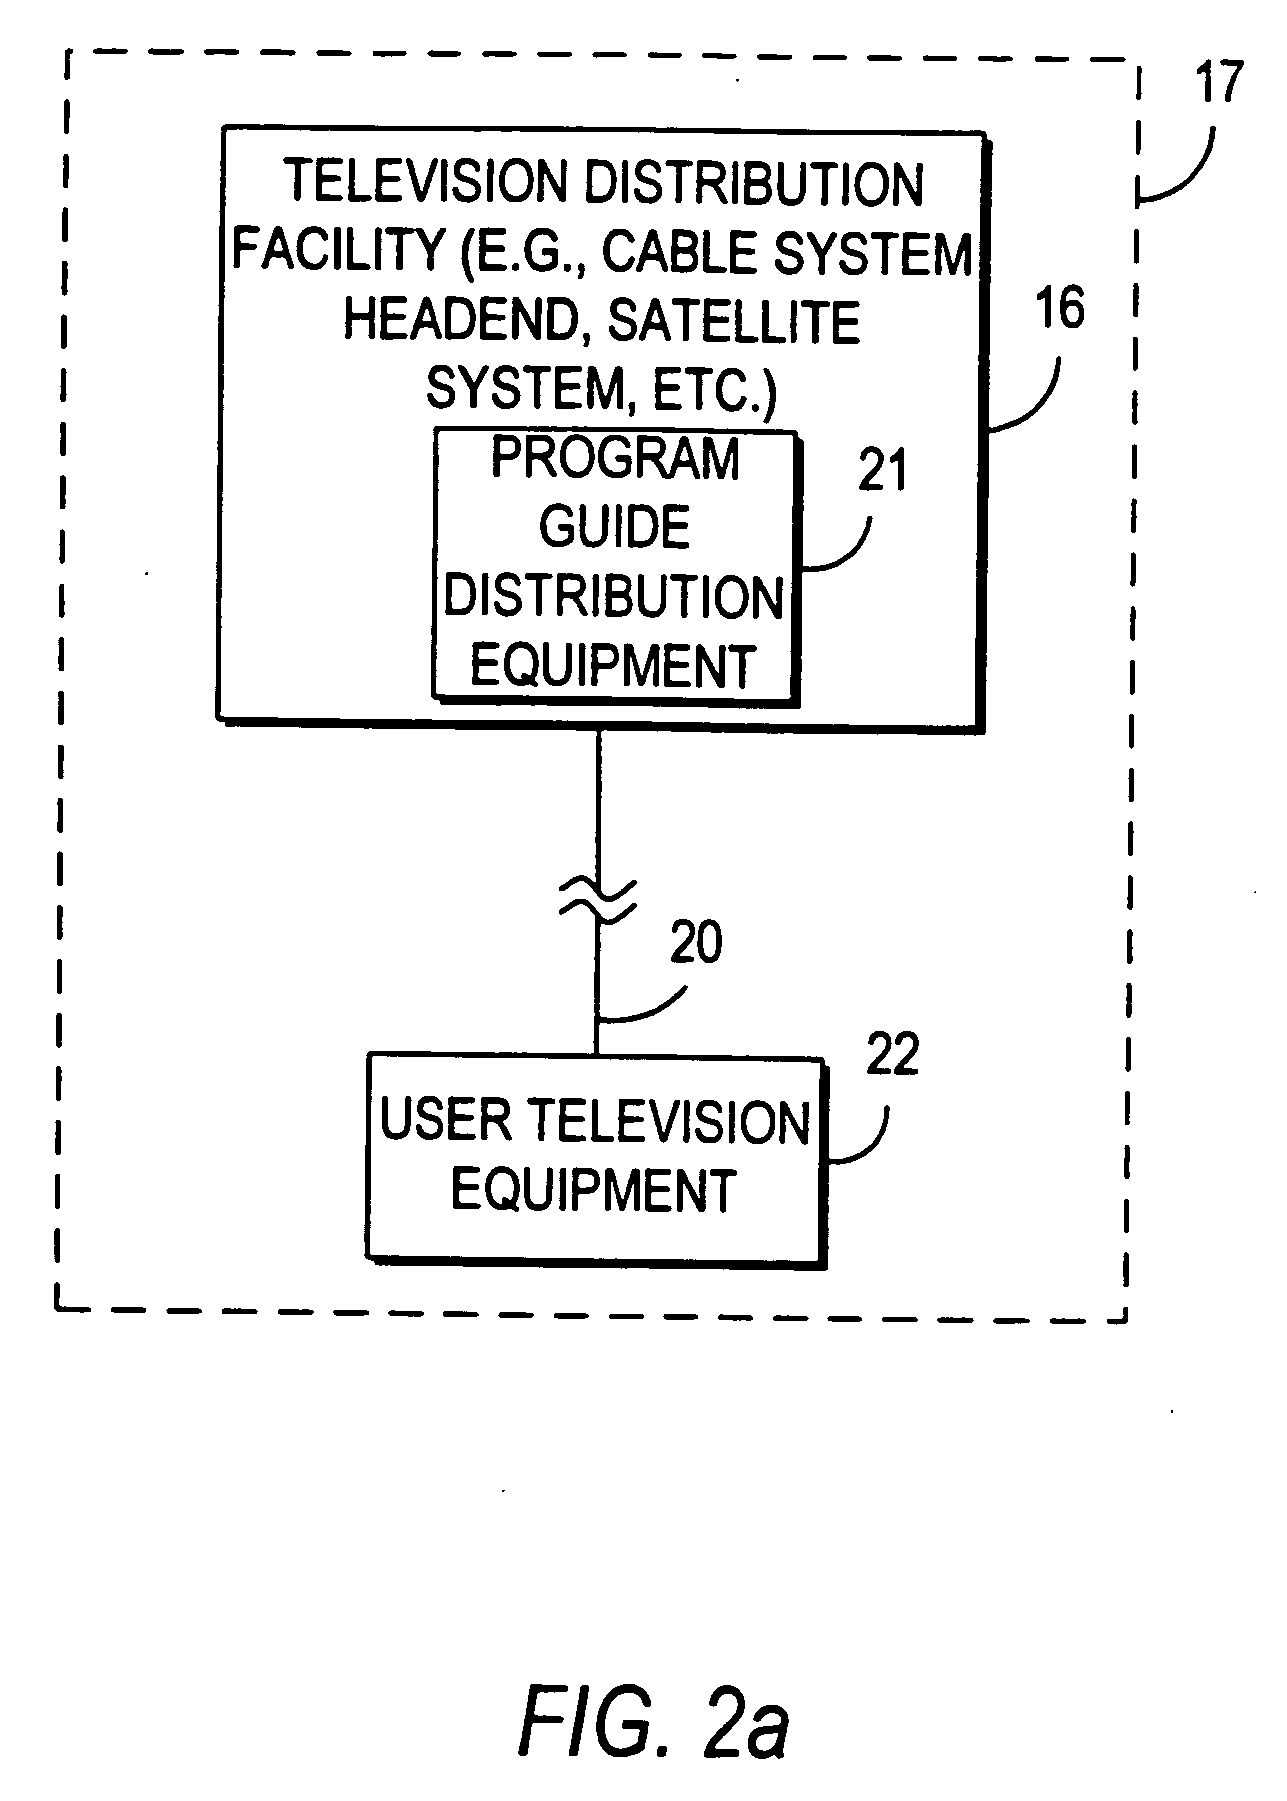 Interactive program guide system and method